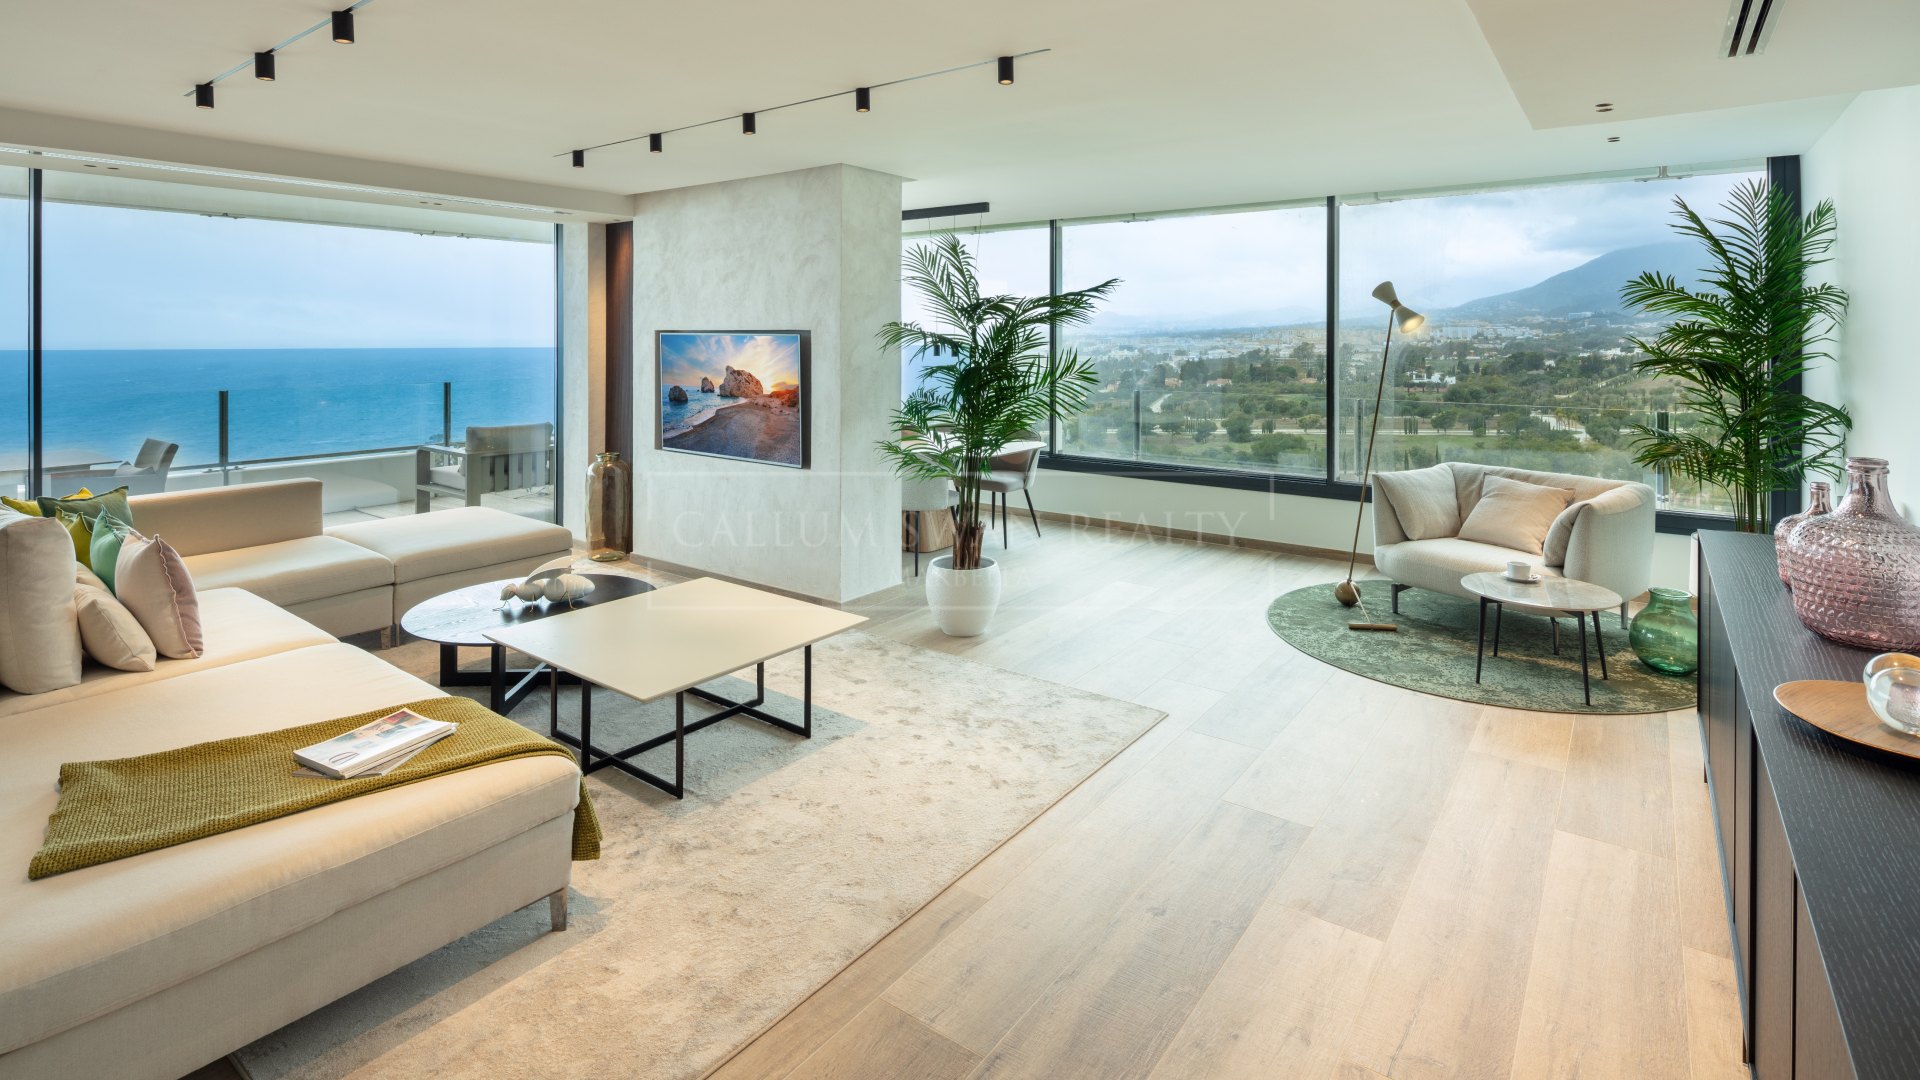 Stunning luxury flat with spectacular sea views in the east side of the Marbella